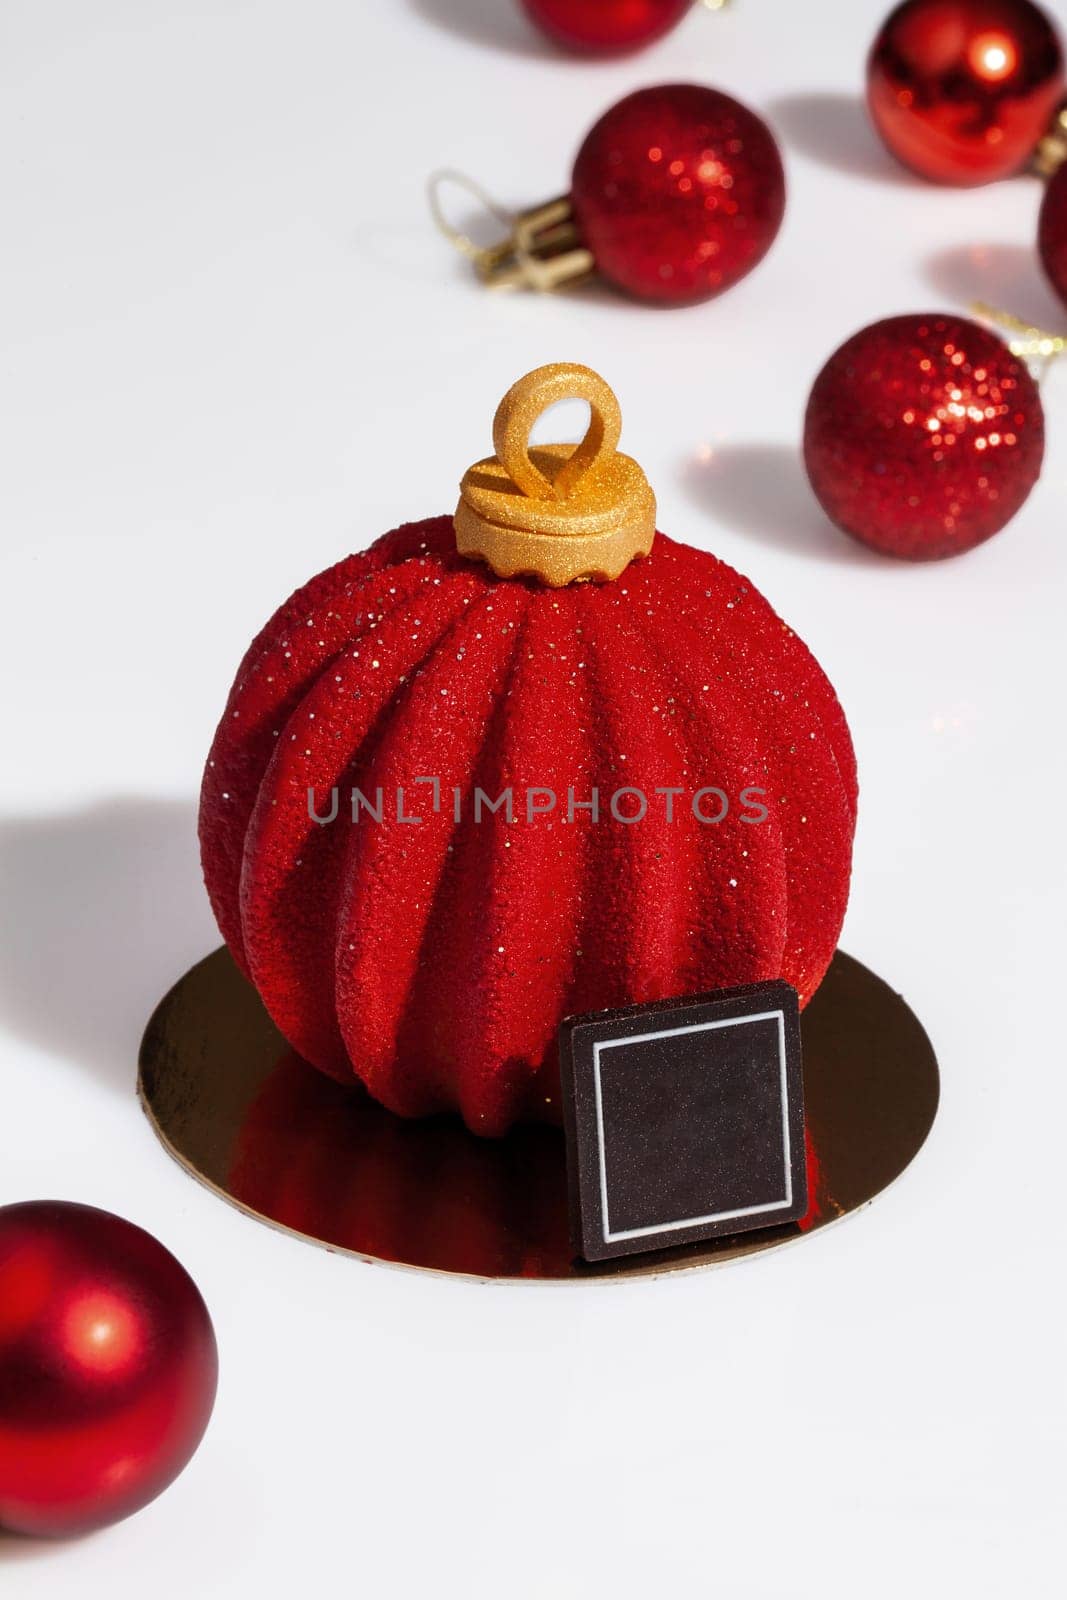 Red sparkling Christmas tree toys and ball shaped cake on white surface. Festive handmade dessert of chocolate mousse, cherry compote, hazelnut and almond biscuit covered with colored sugar icing